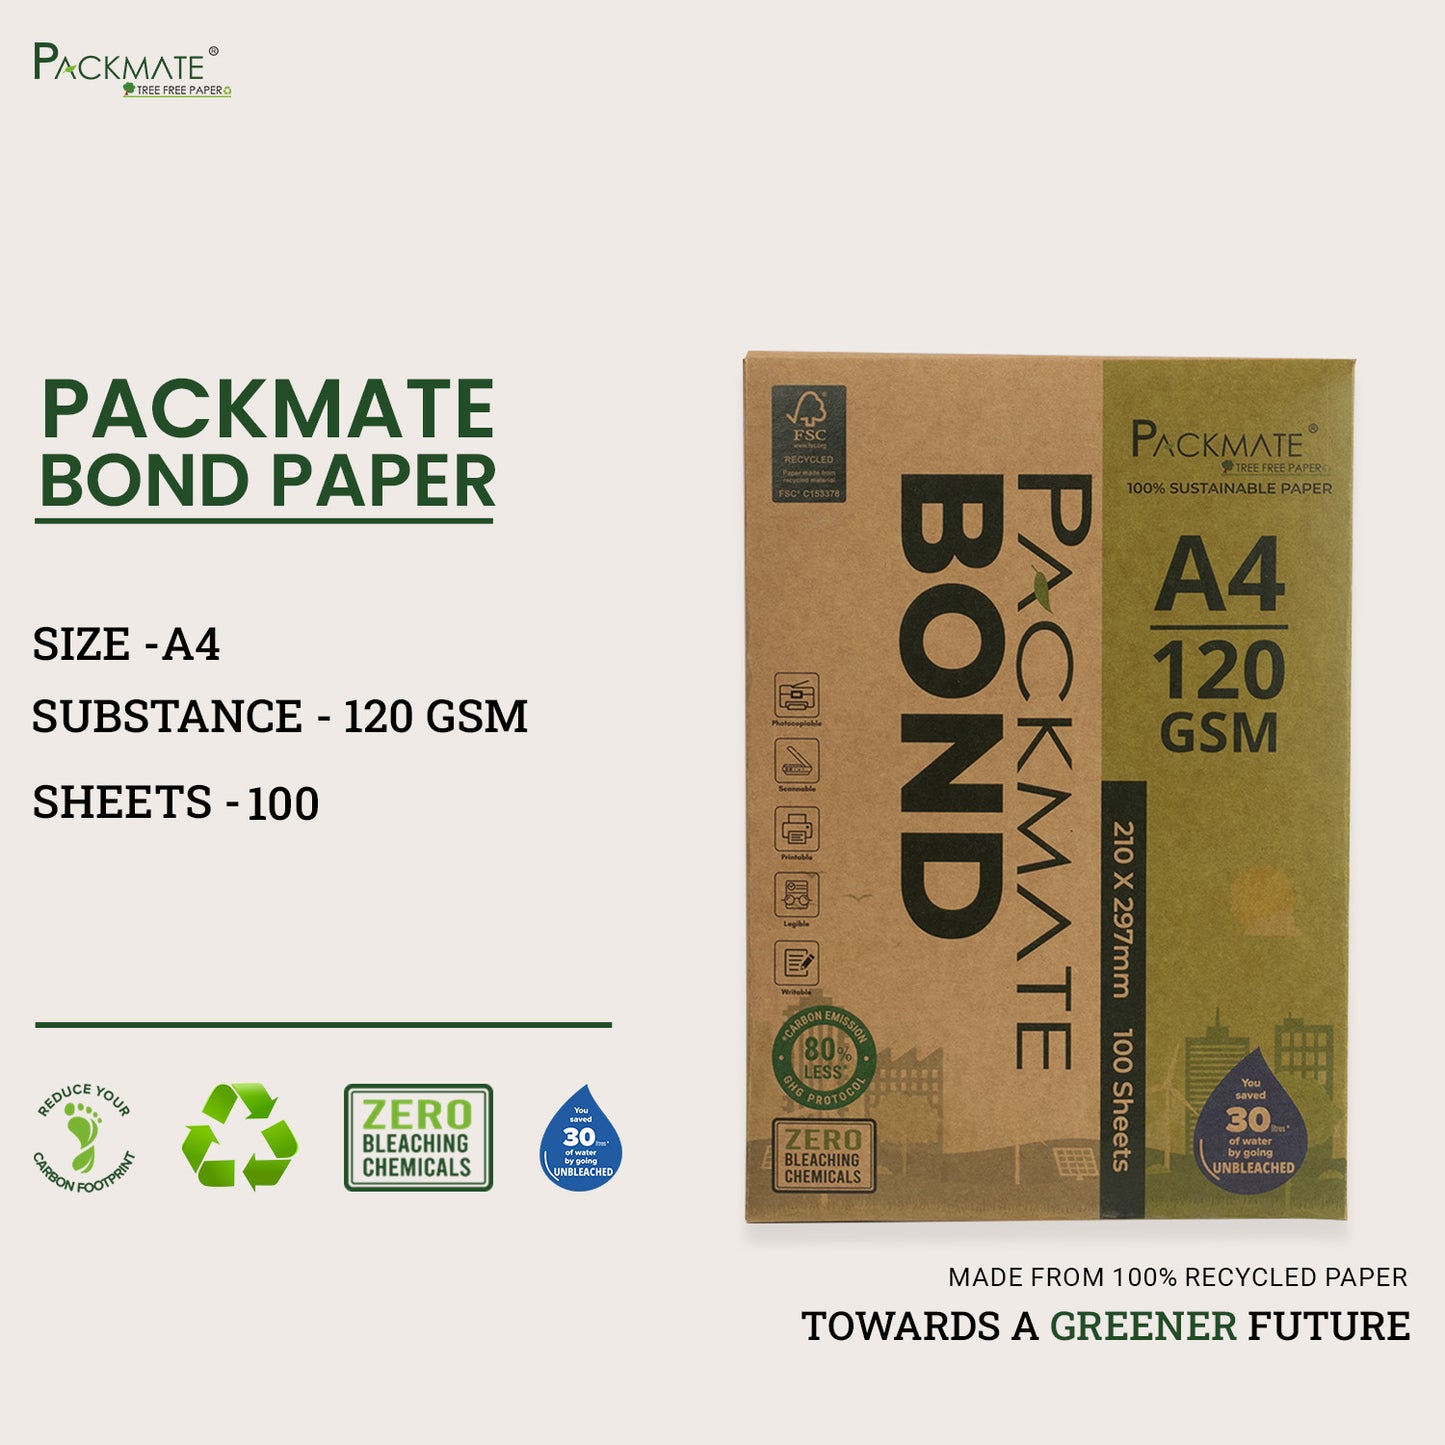 Packmate Bond Paper (120 GSM | A4 Size - 100 Sheets) Pack of 3 Ream | Made From 100% Recycled Paper